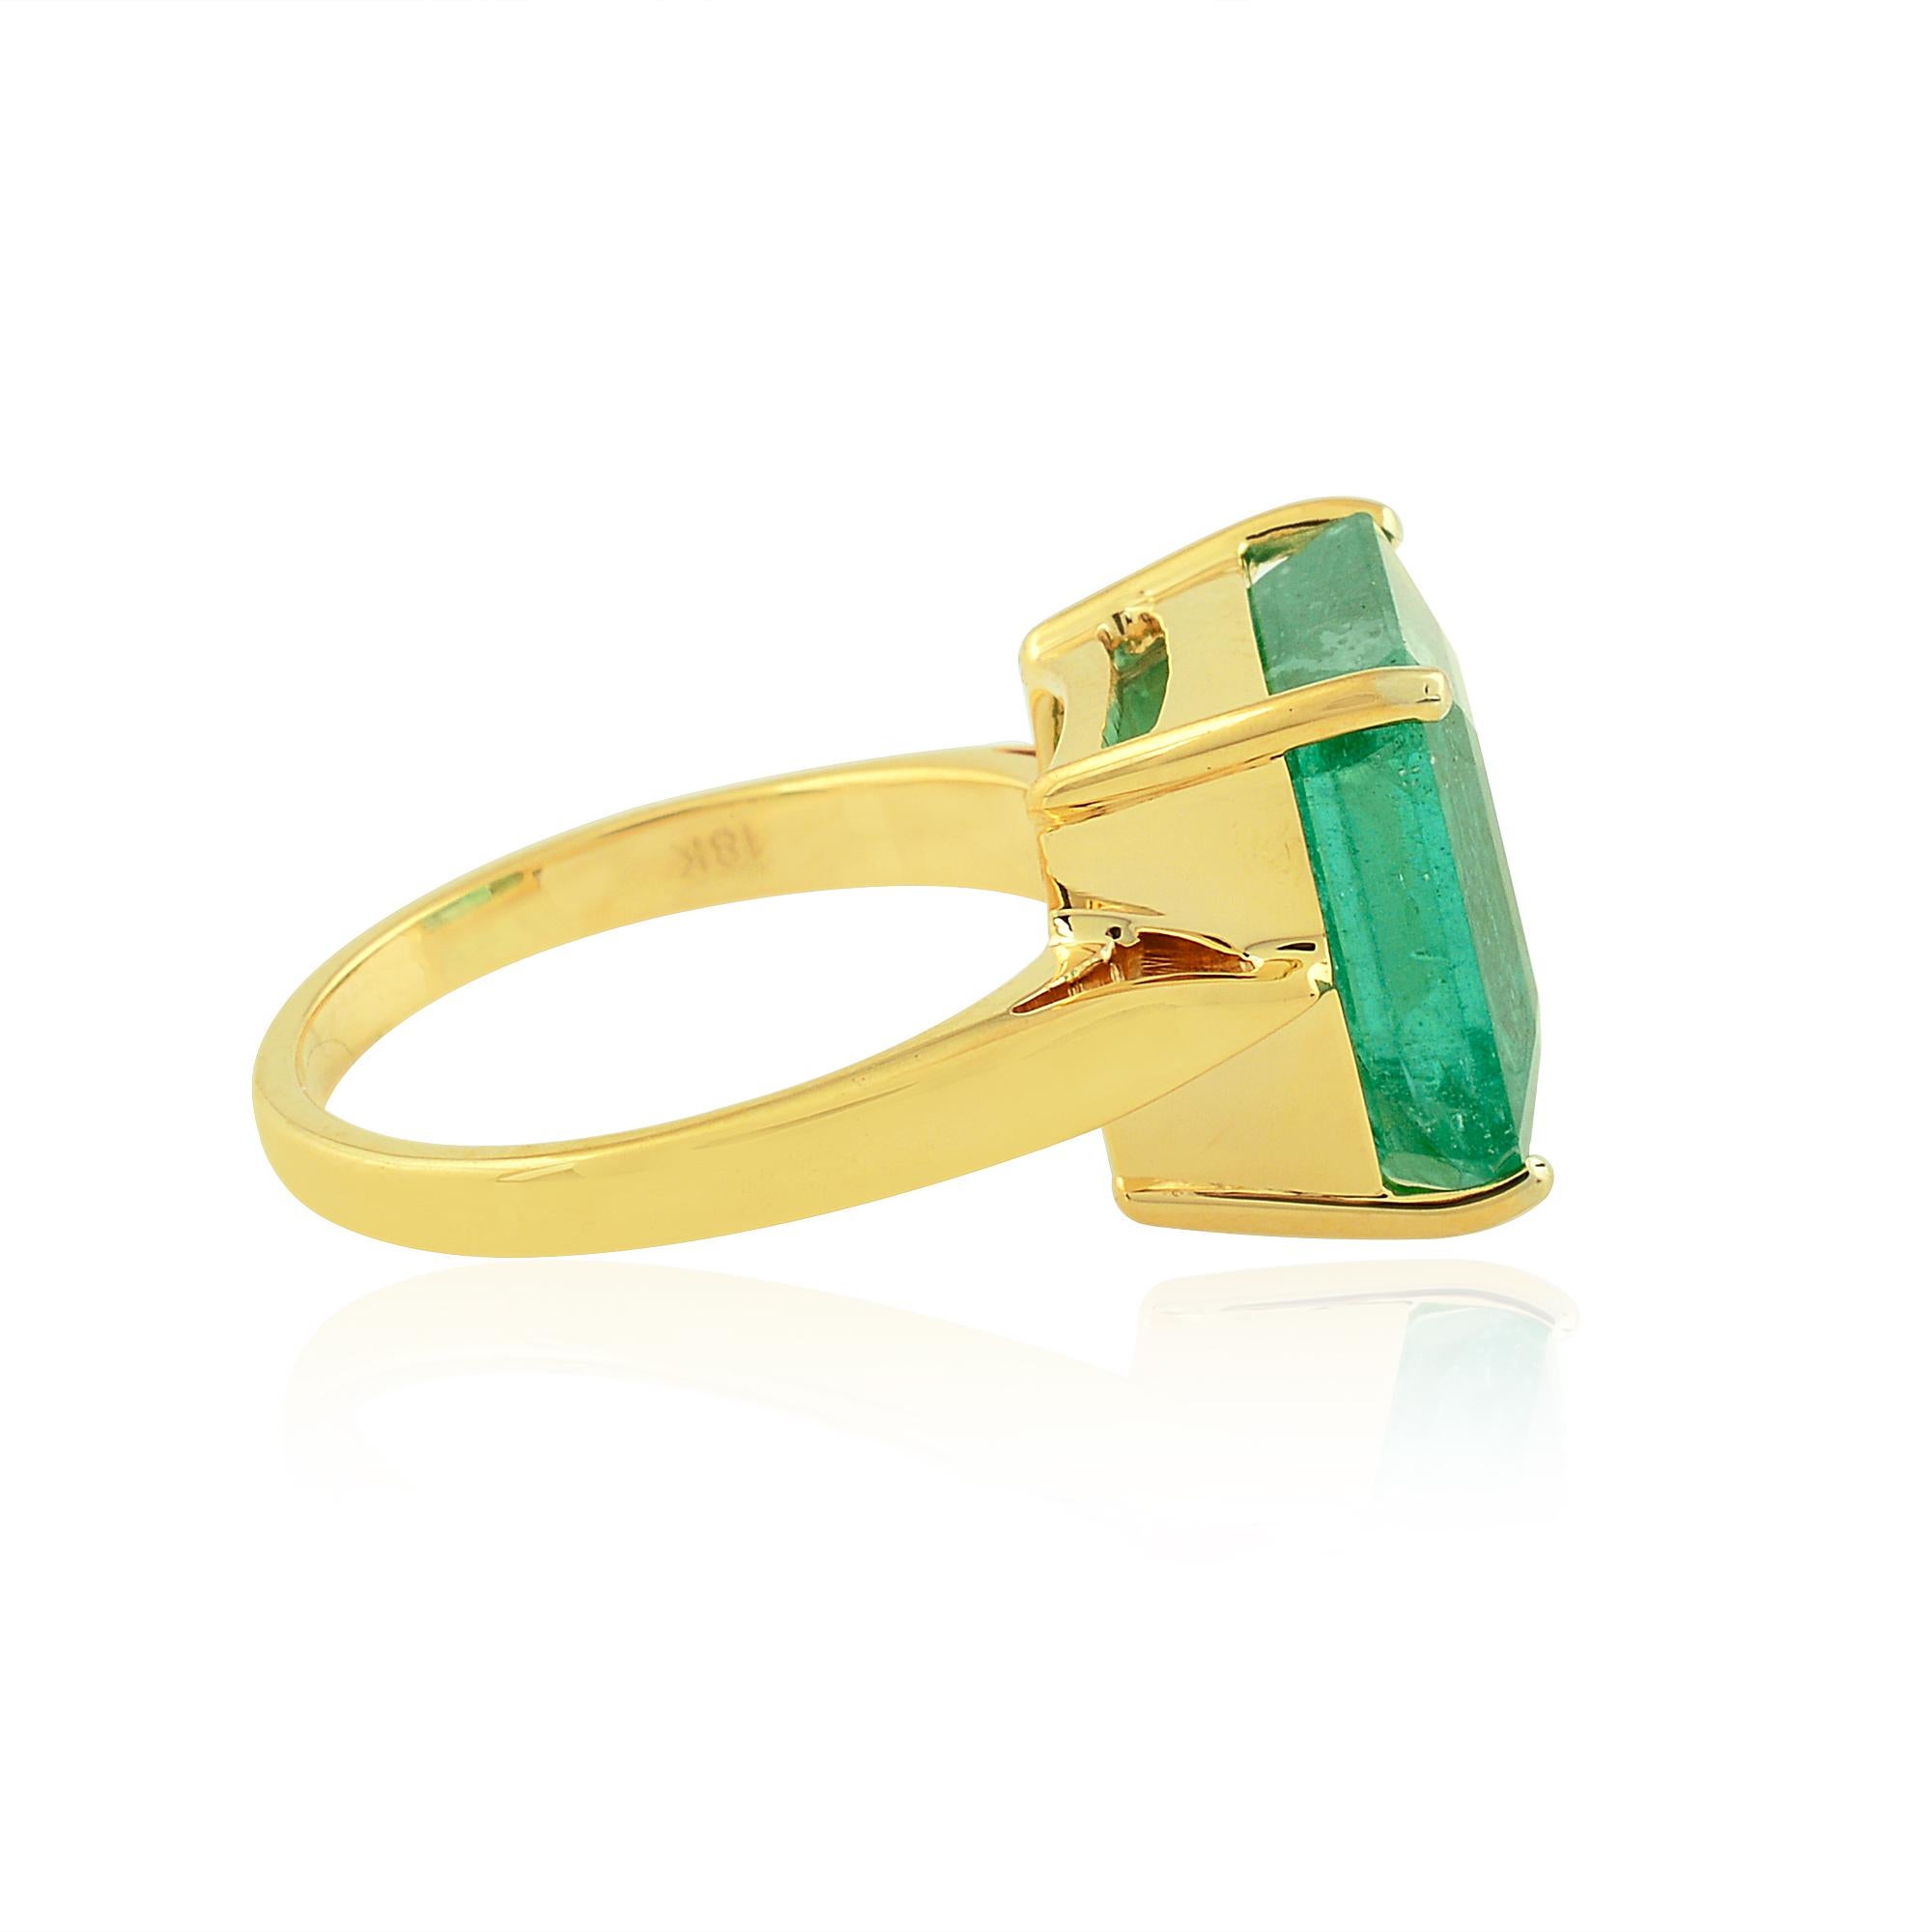 Modern Natural 5.84 Carat Solitaire Emerald Gemstone Ring 18k Yellow Gold Fine Jewelry